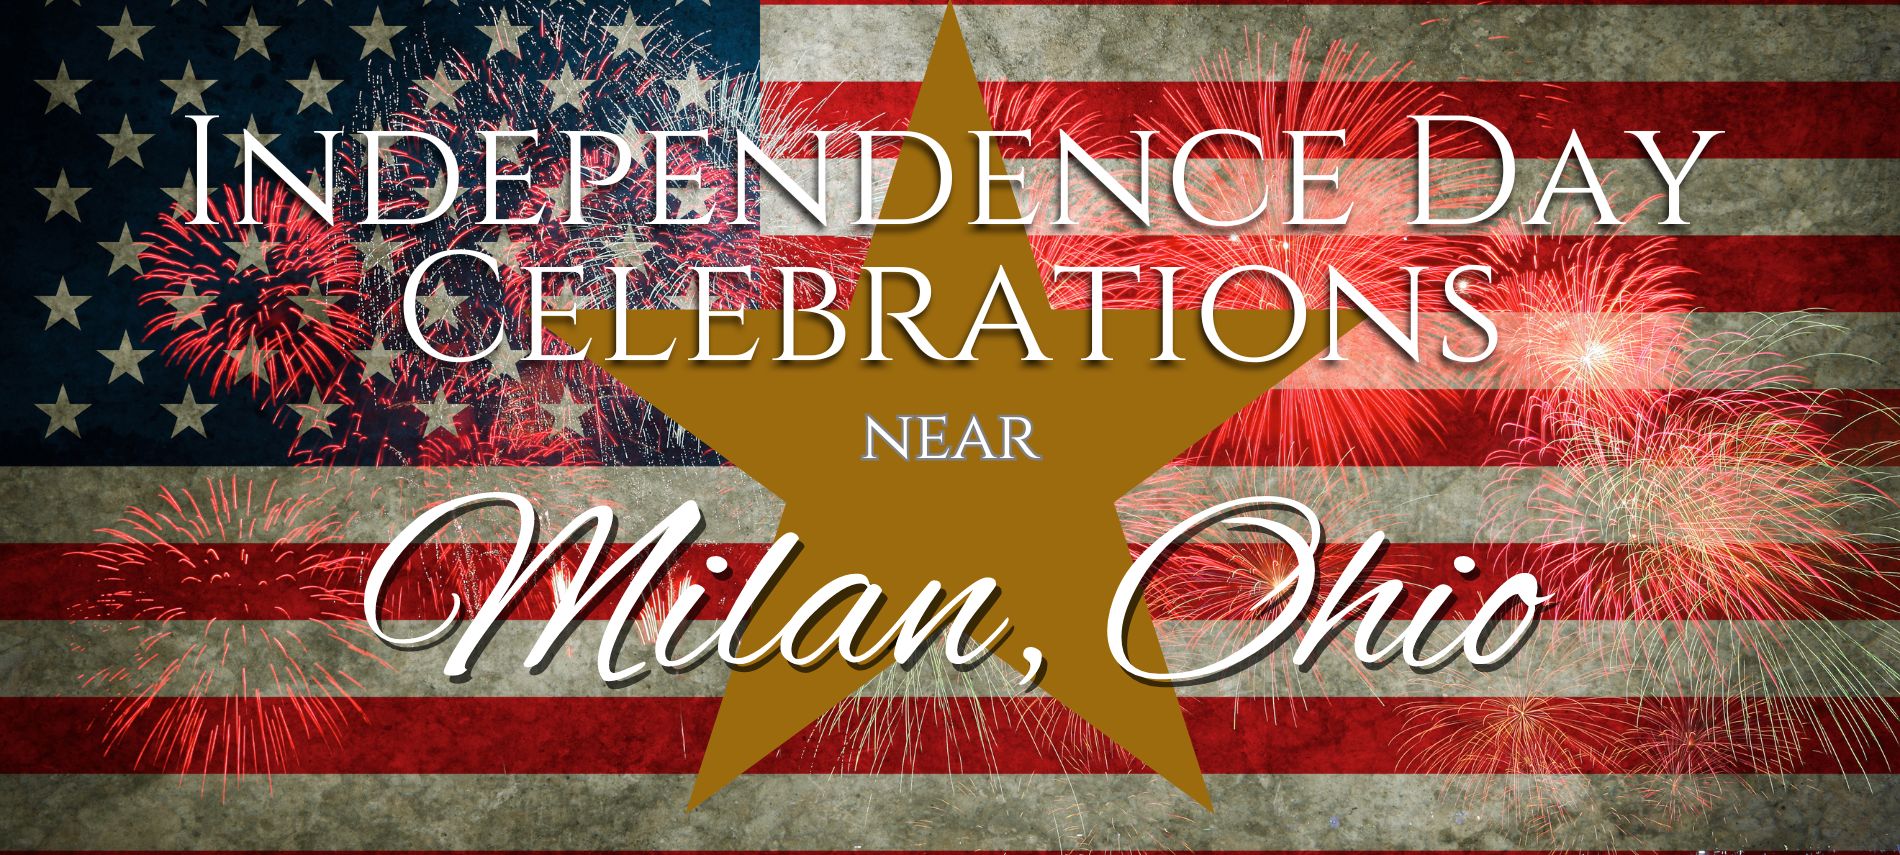 Independence Day Celebrations Near Milan Ohio on a background of a gold star and fireworks against an American flag.